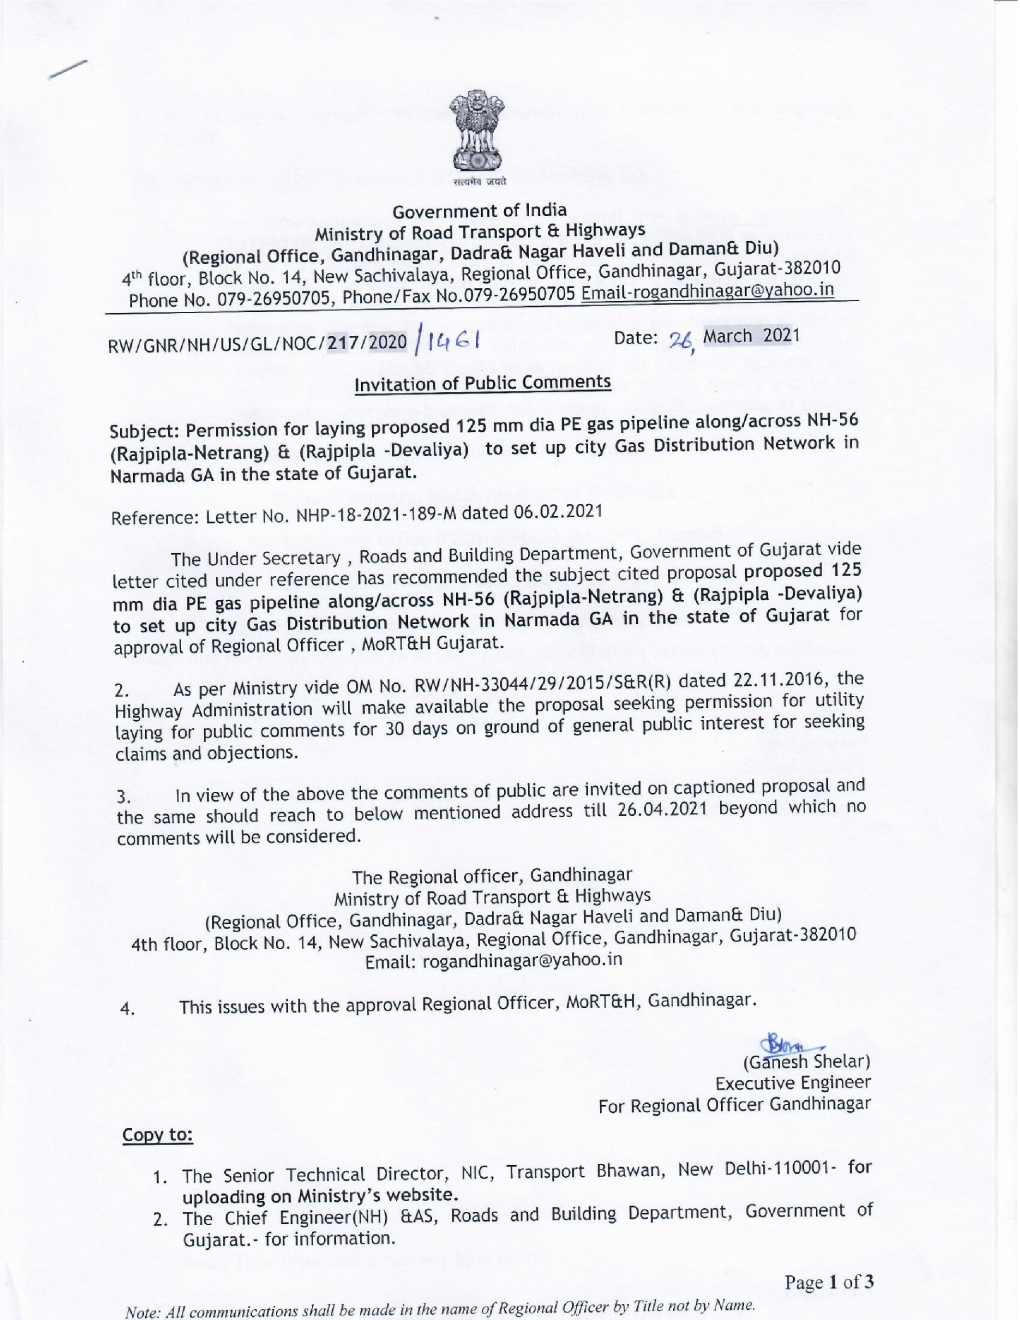 Permission for Laying Proposed 125 Mm Dia PE Gas Pipeline Along